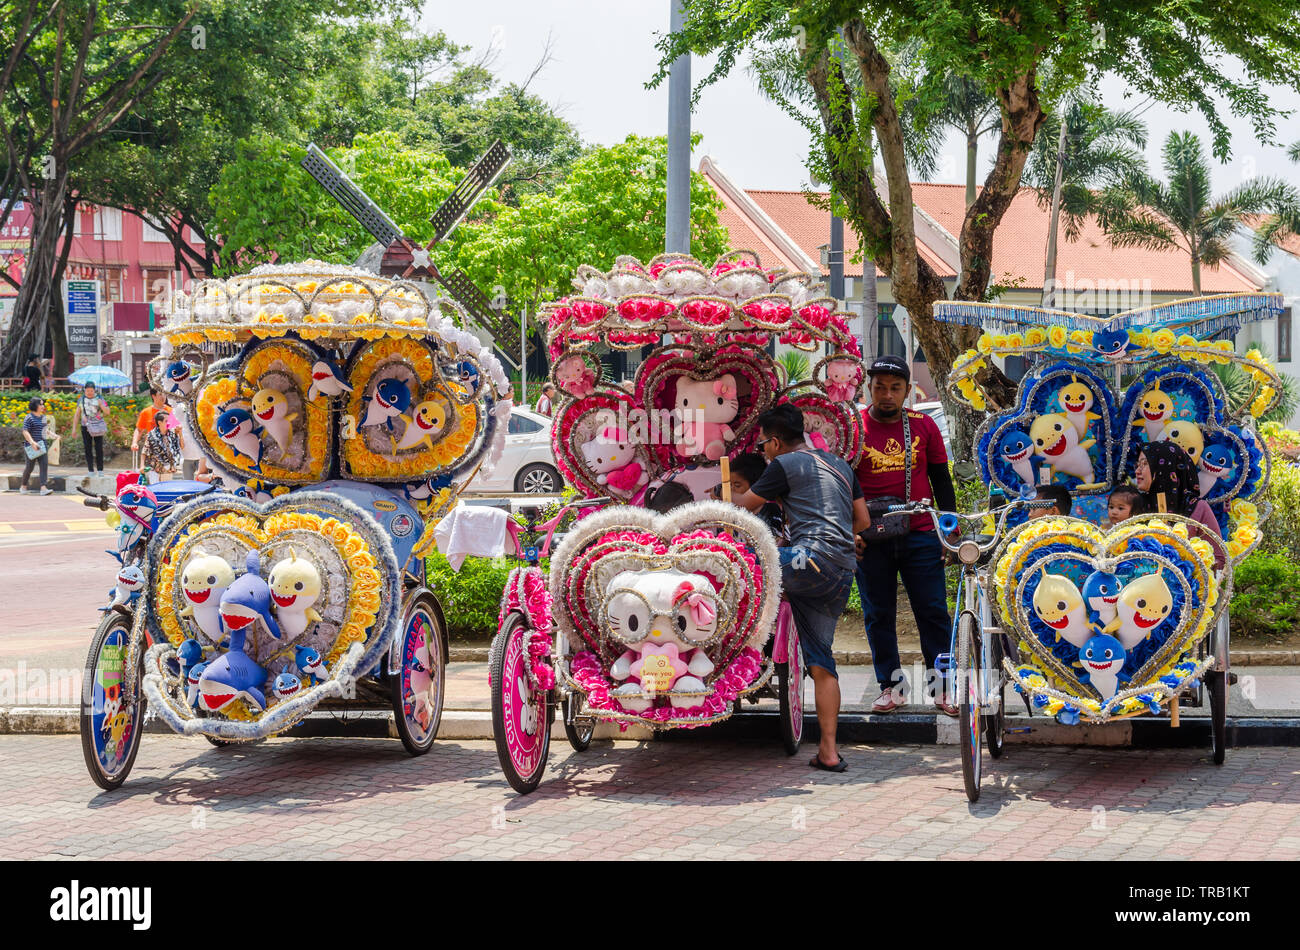 Malacca,Malaysia - April 21,2019 : The colorful decorated rickshaws are parking in Dutch Square Malacca waiting for customers. Stock Photo